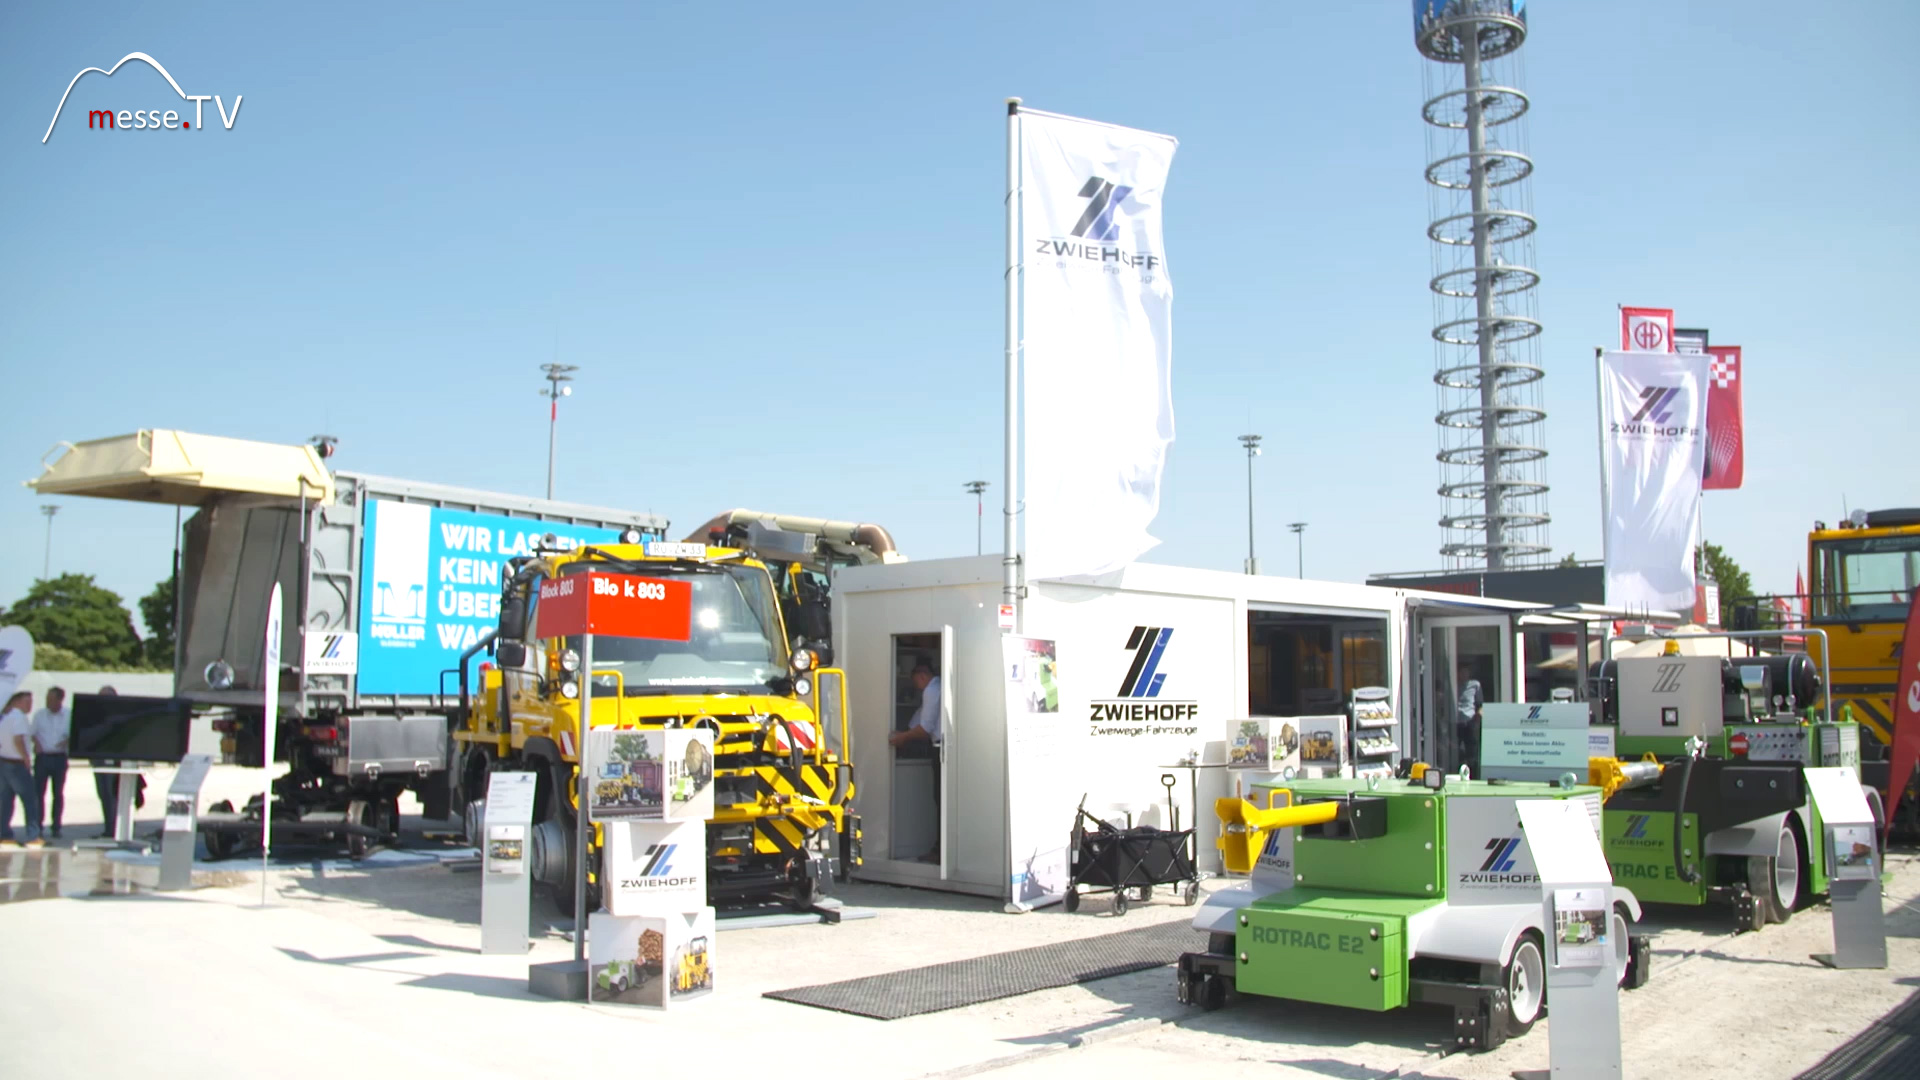 ZWIEHOFF Messestand transport logistic 2019 Messe Muenchen